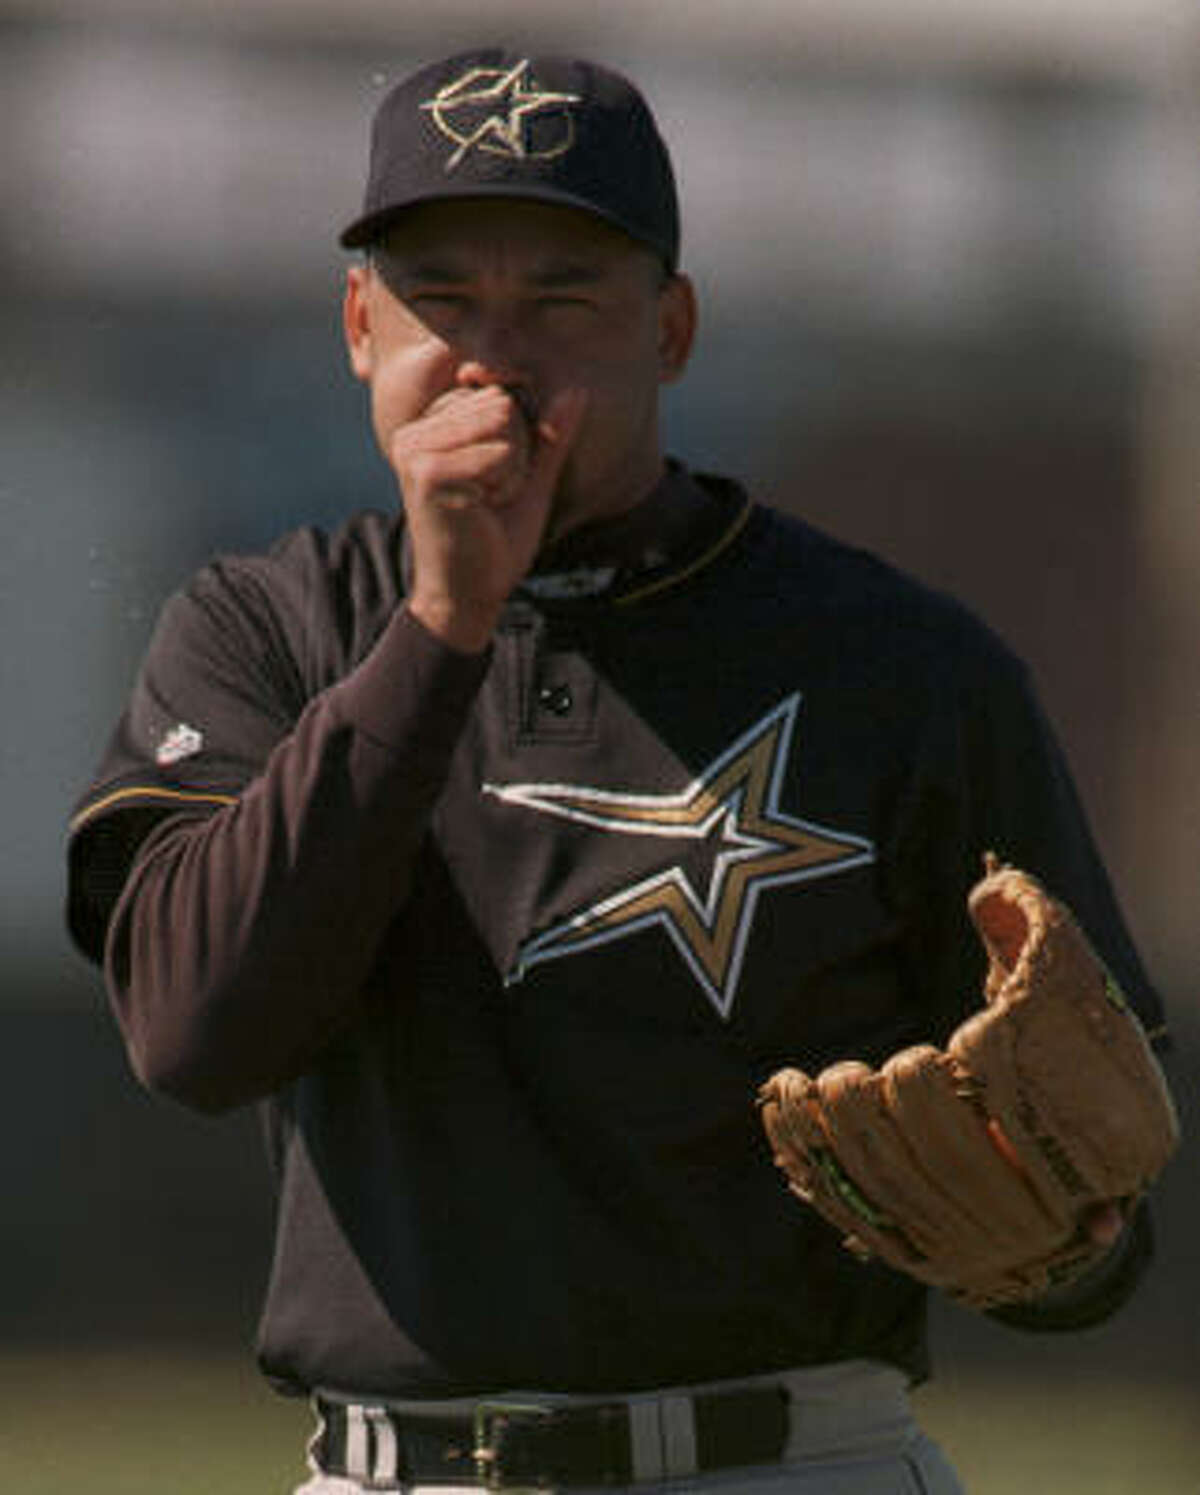 1997: In his first full season in the majors, Lima went 1-6 with a 5.28 ERA and led all Astros relievers in innings pitched (75).